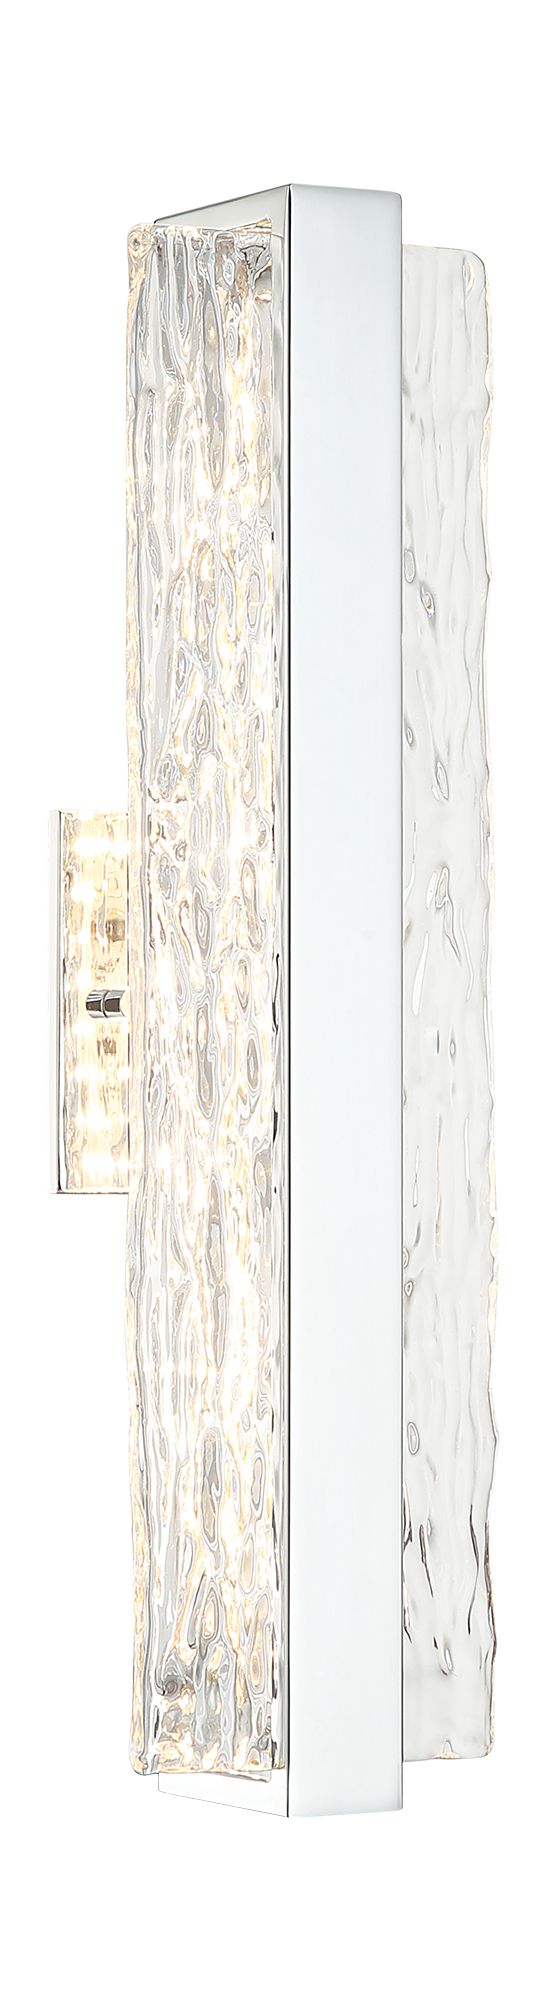 NIAGARA Wall sconce Chrome INTEGRATED LED - S02018CH | MATTEO